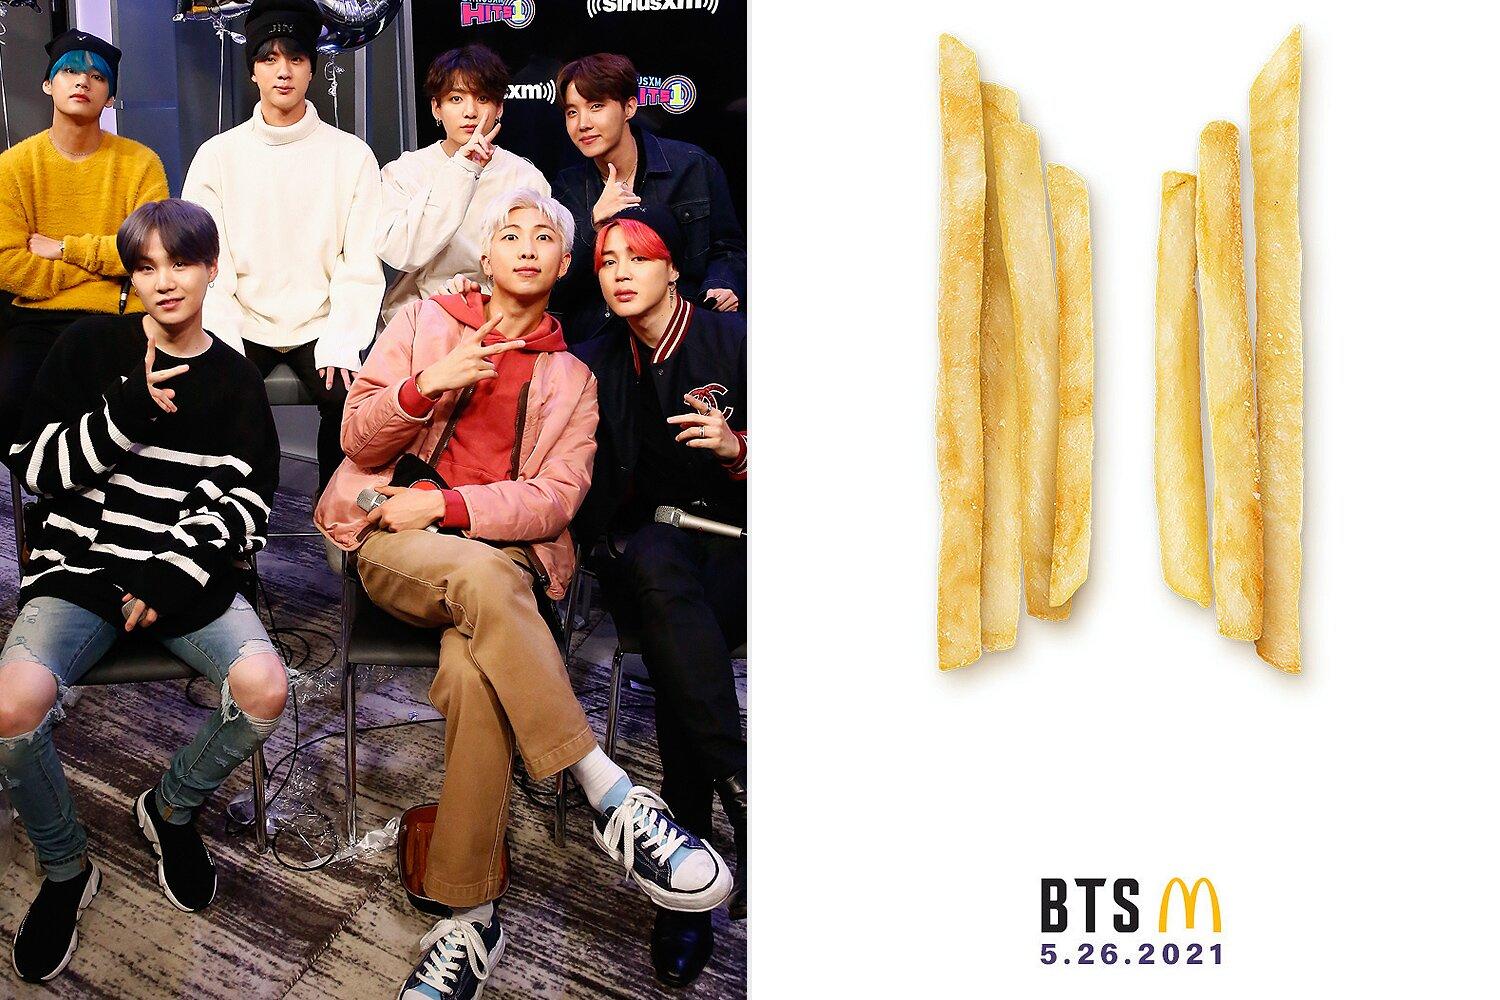 BTS meal at McDonald’s will incorporate sweet chili, Cajun sauces never before released in the U.S.